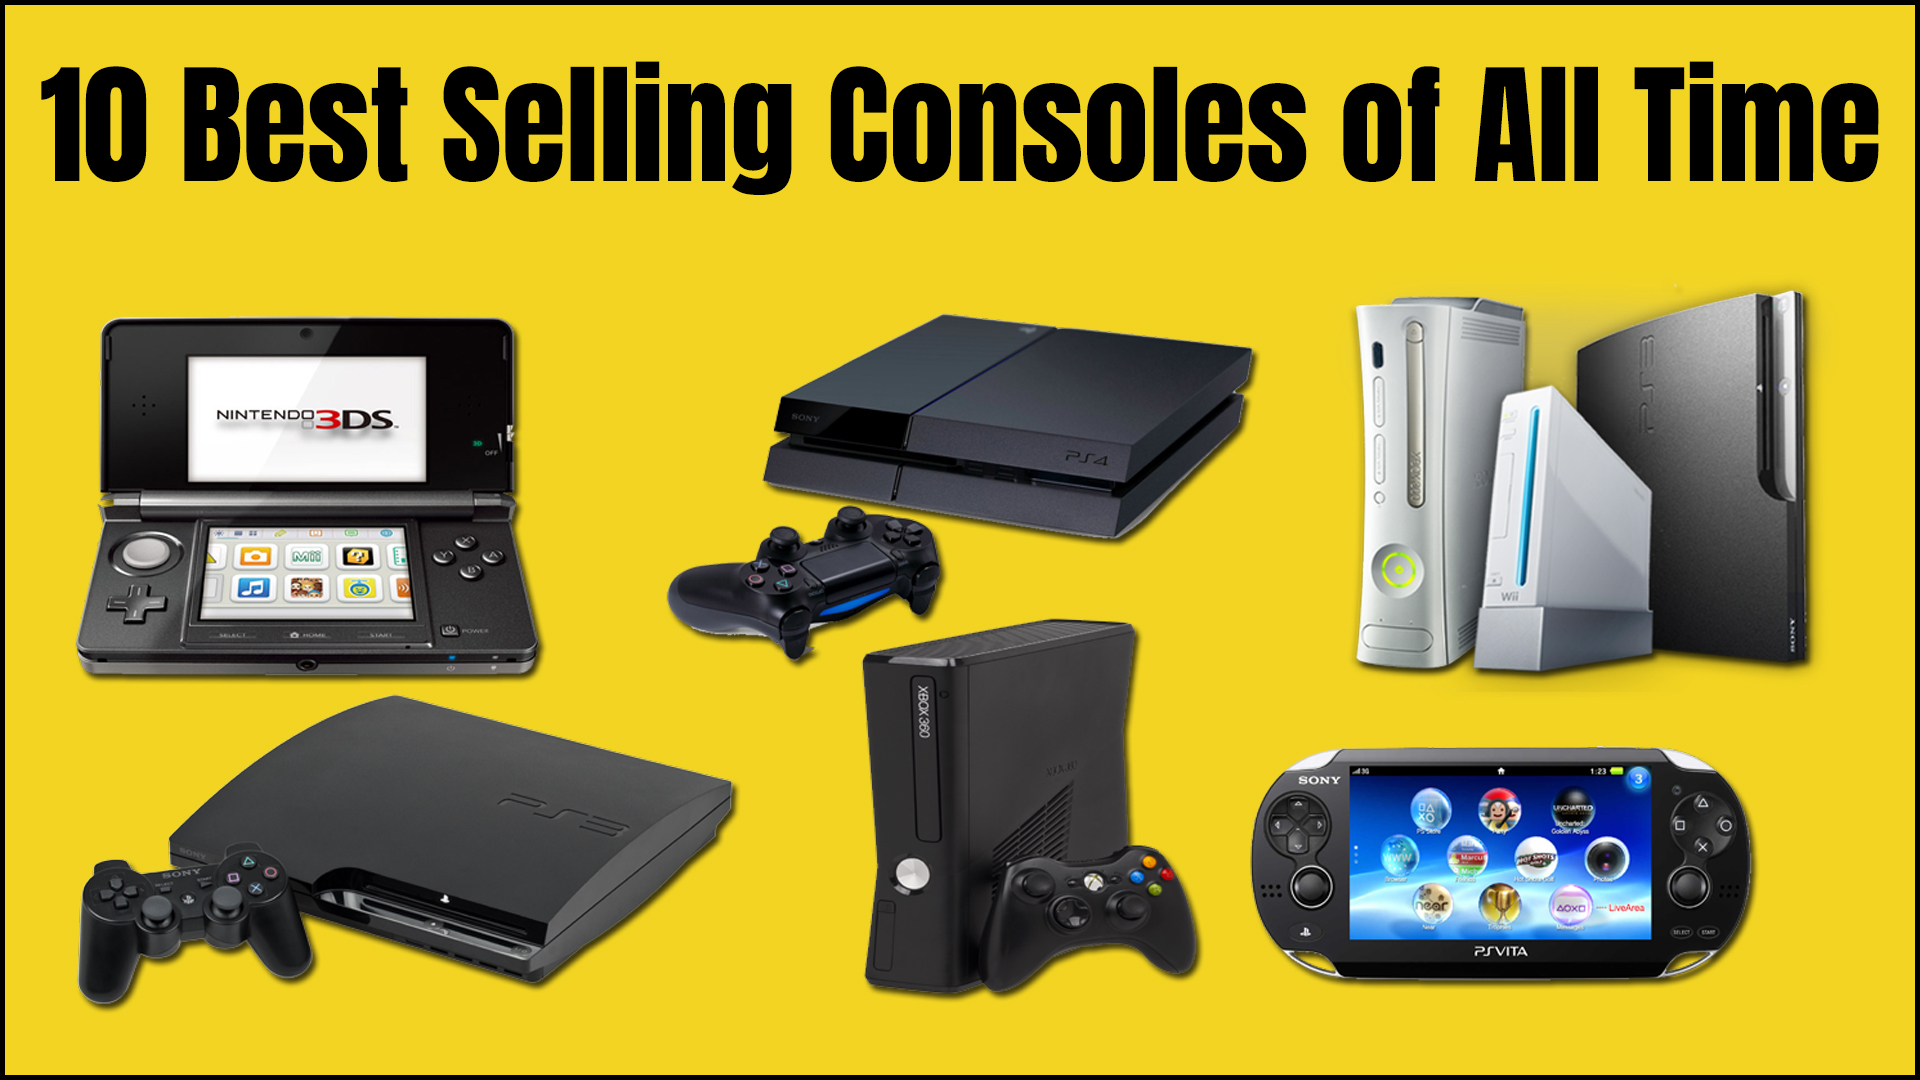 10 Best Selling Consoles of All Time